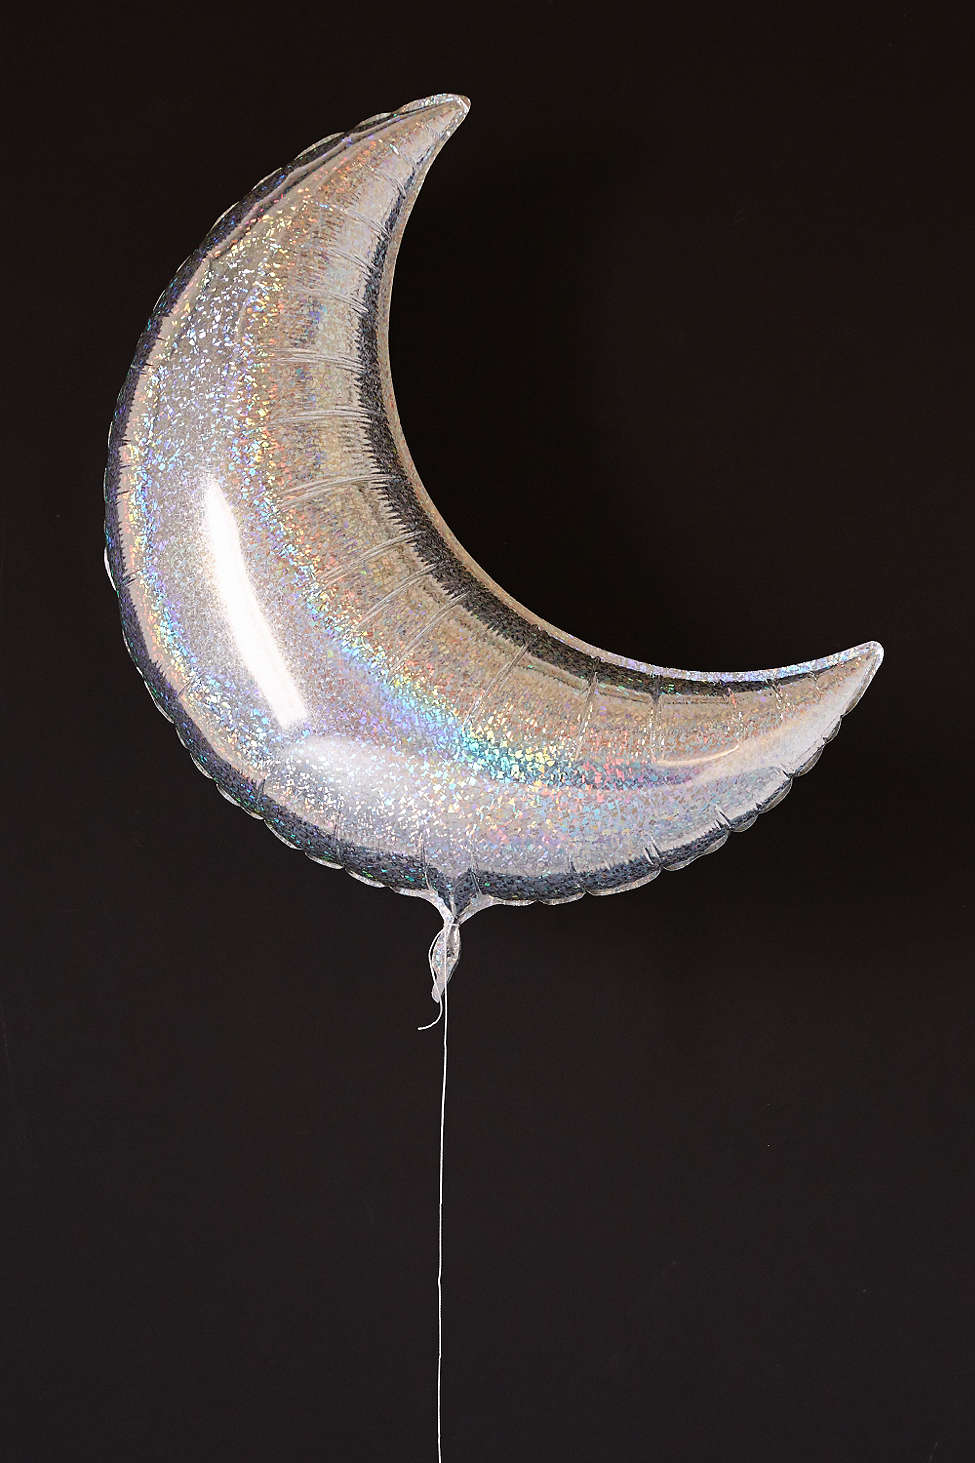 Holographic moon balloons from Urban Outfitters